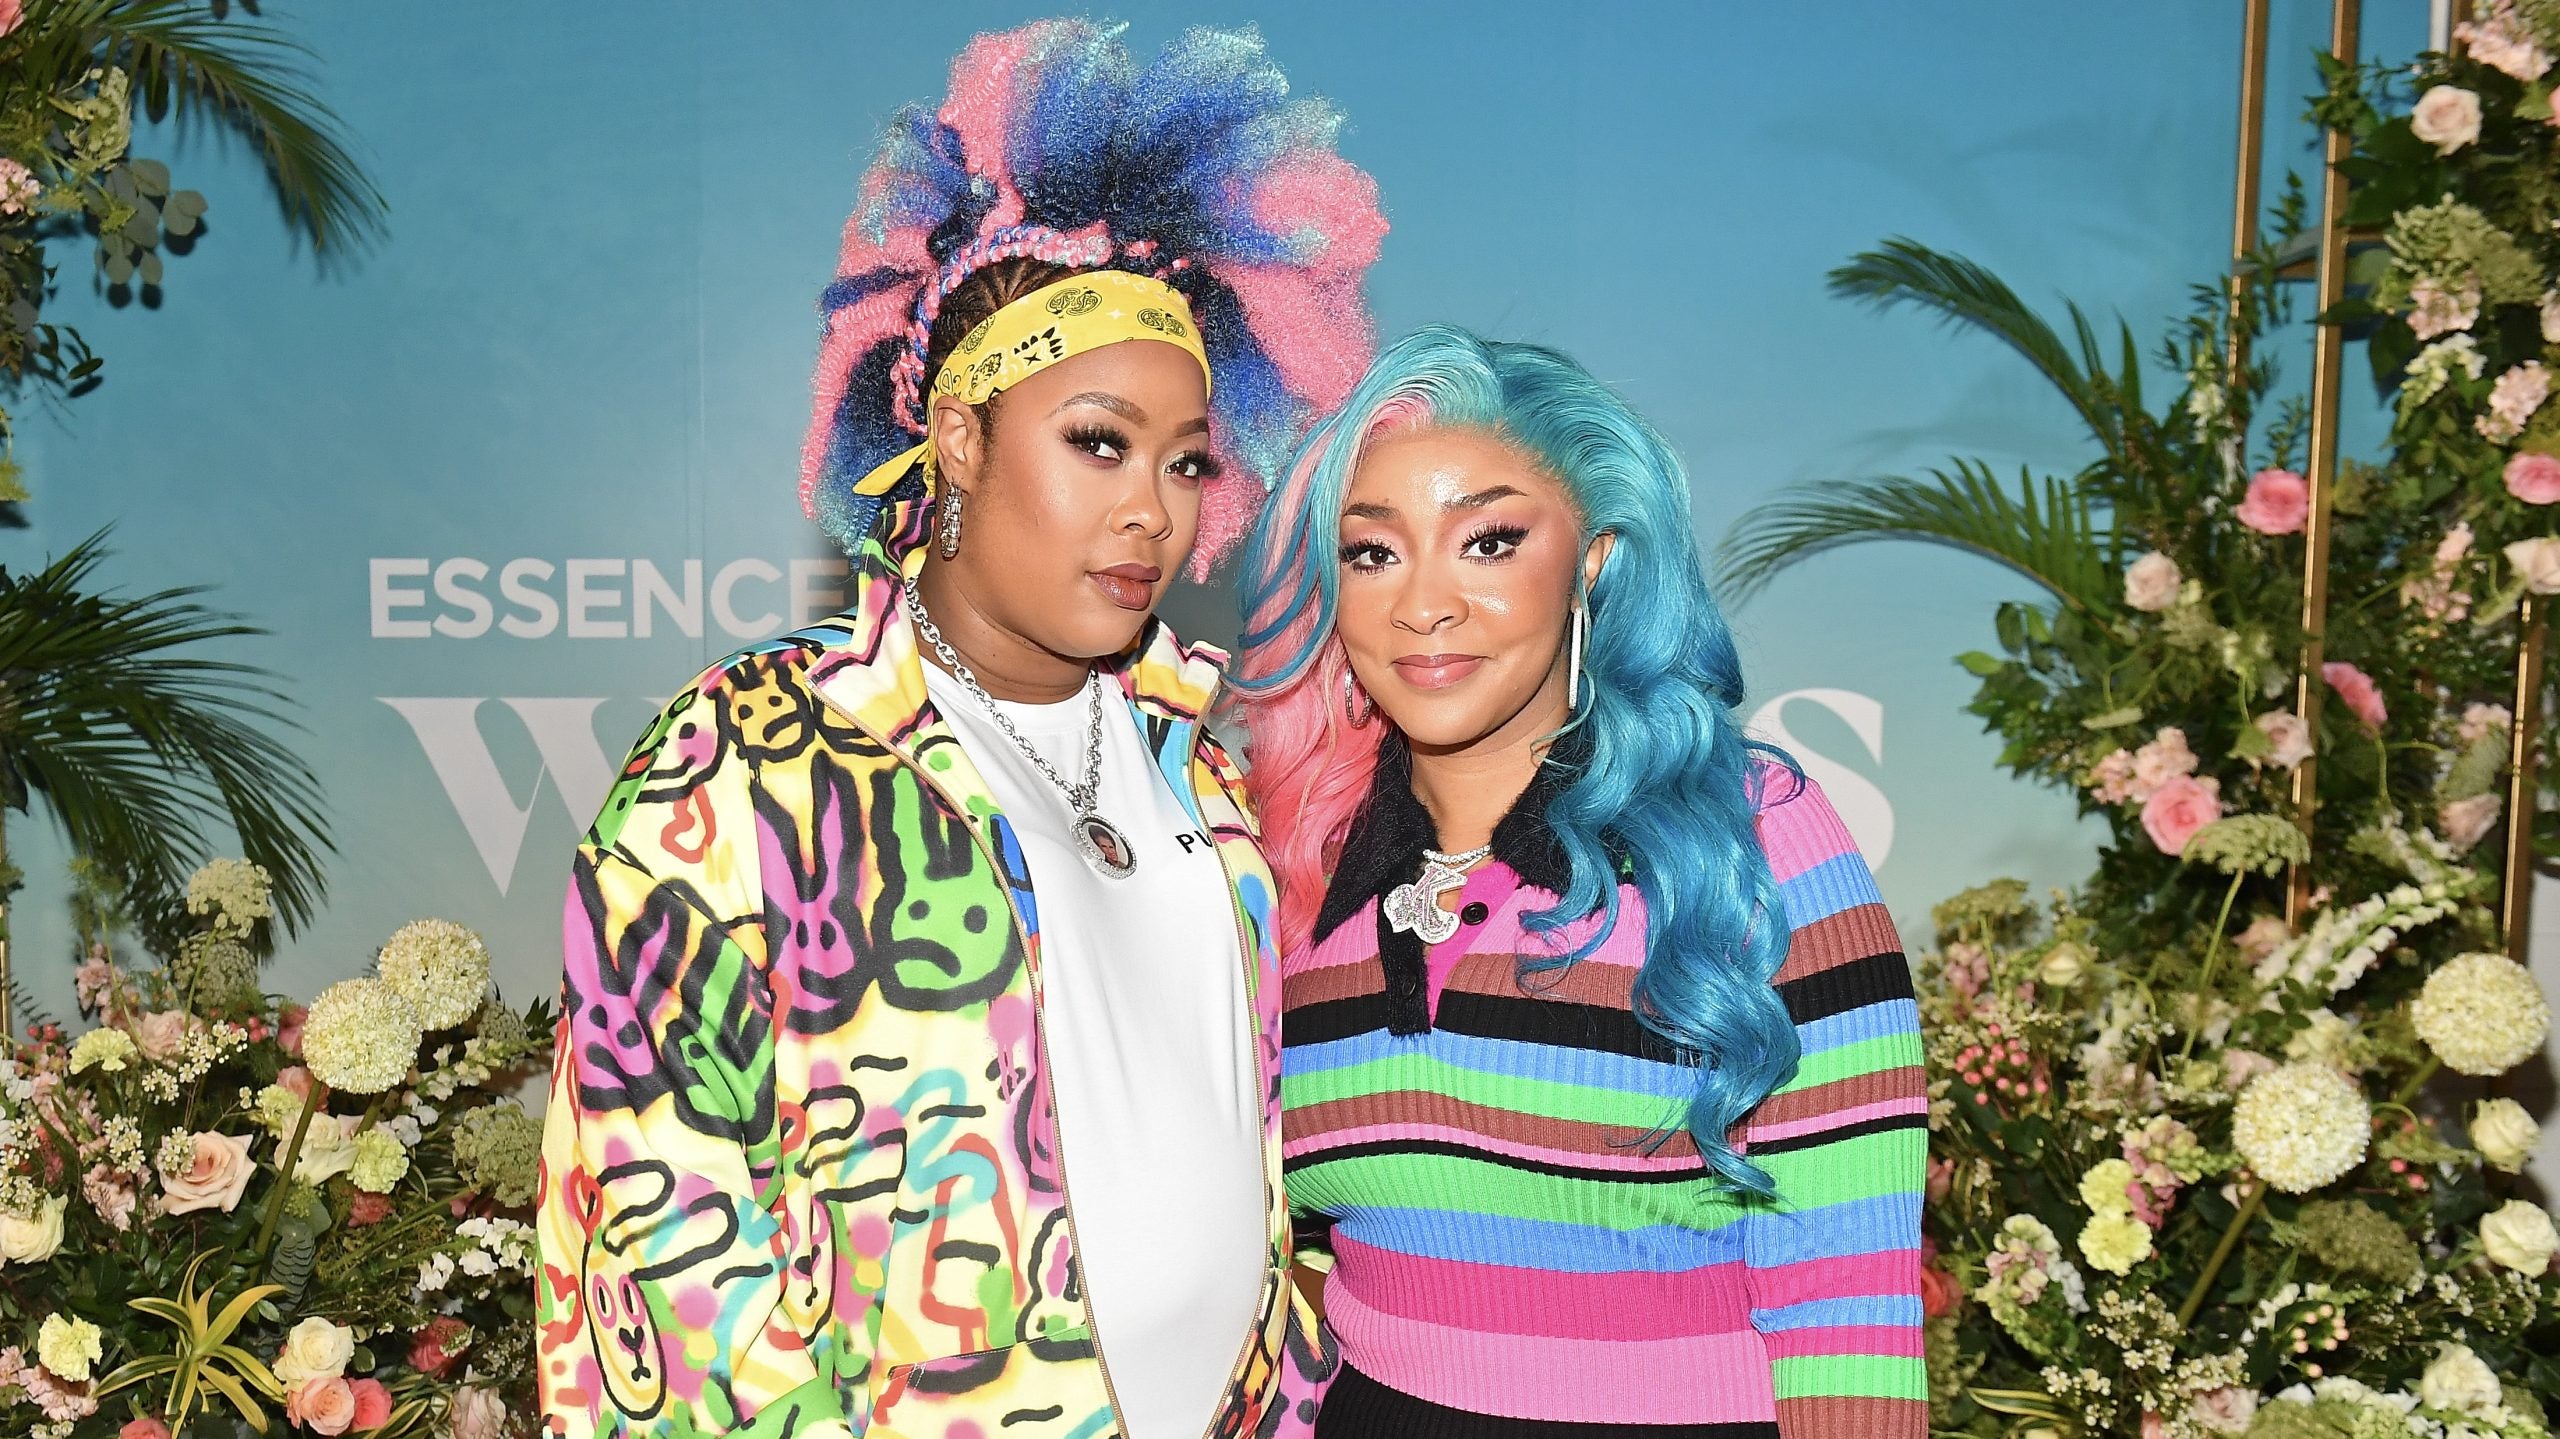 Da Brat And Wife Jesseca Harris-DuPart Are Gifting An IVF Cycle Worth 10K For National Infertility Week